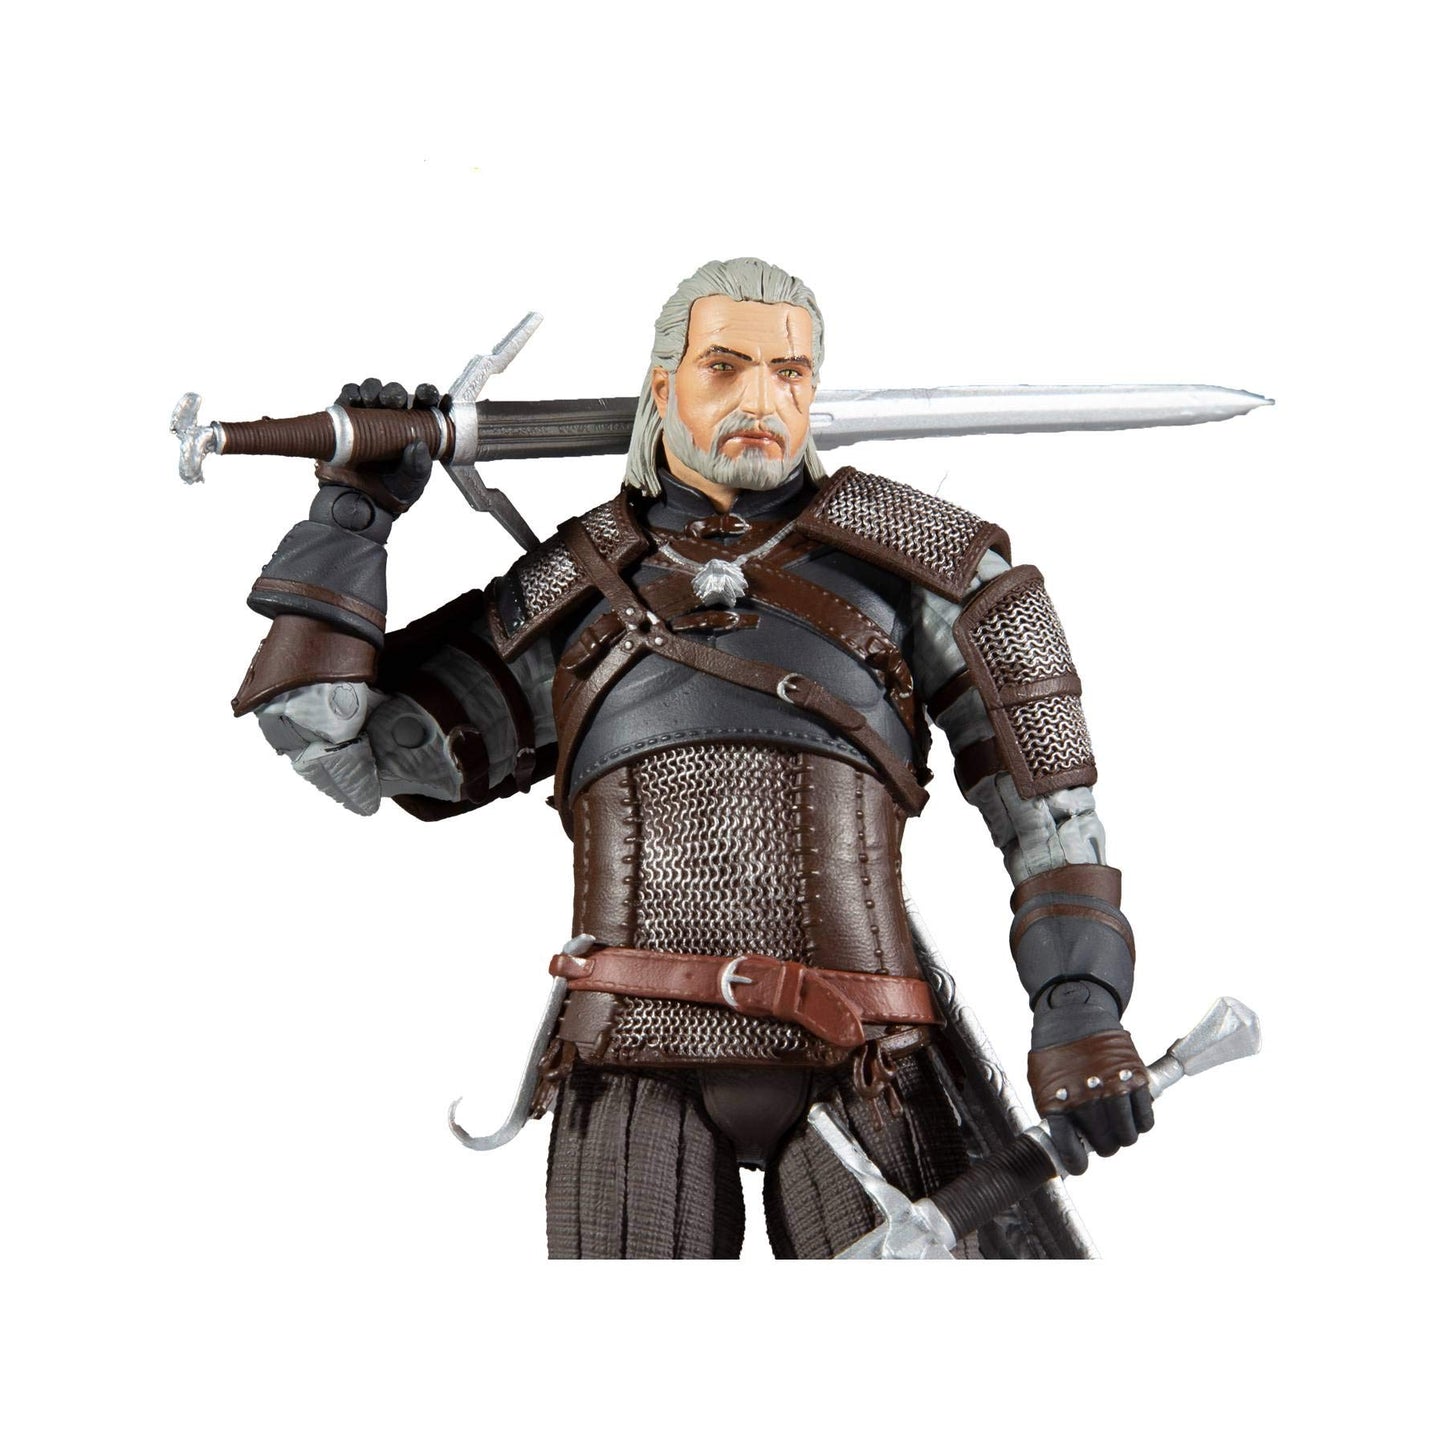 McFarlane Toys - The Witcher - Geralt of Rivia 7" Action Figure